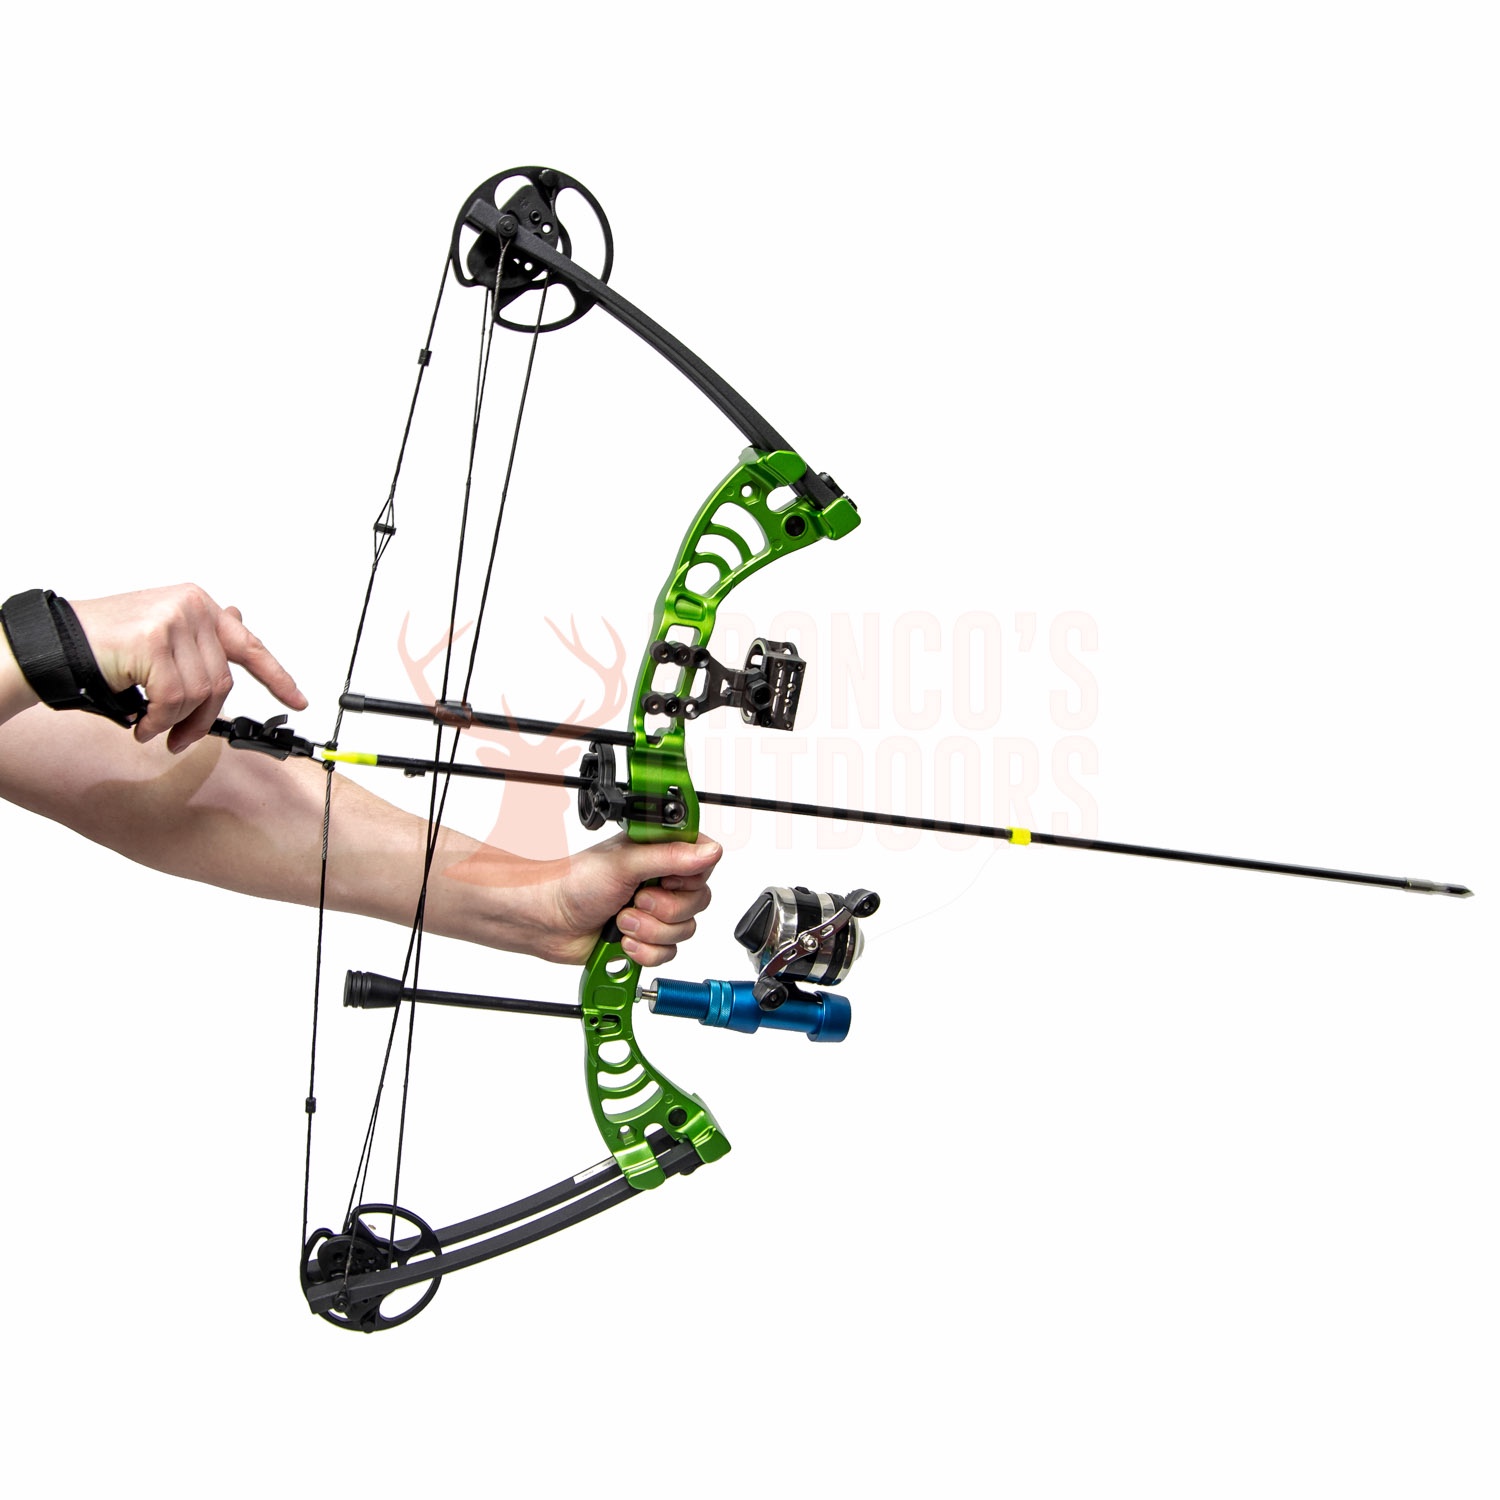 Man Kung 55LB Compound Bow - Lime + Bow fishing Kit